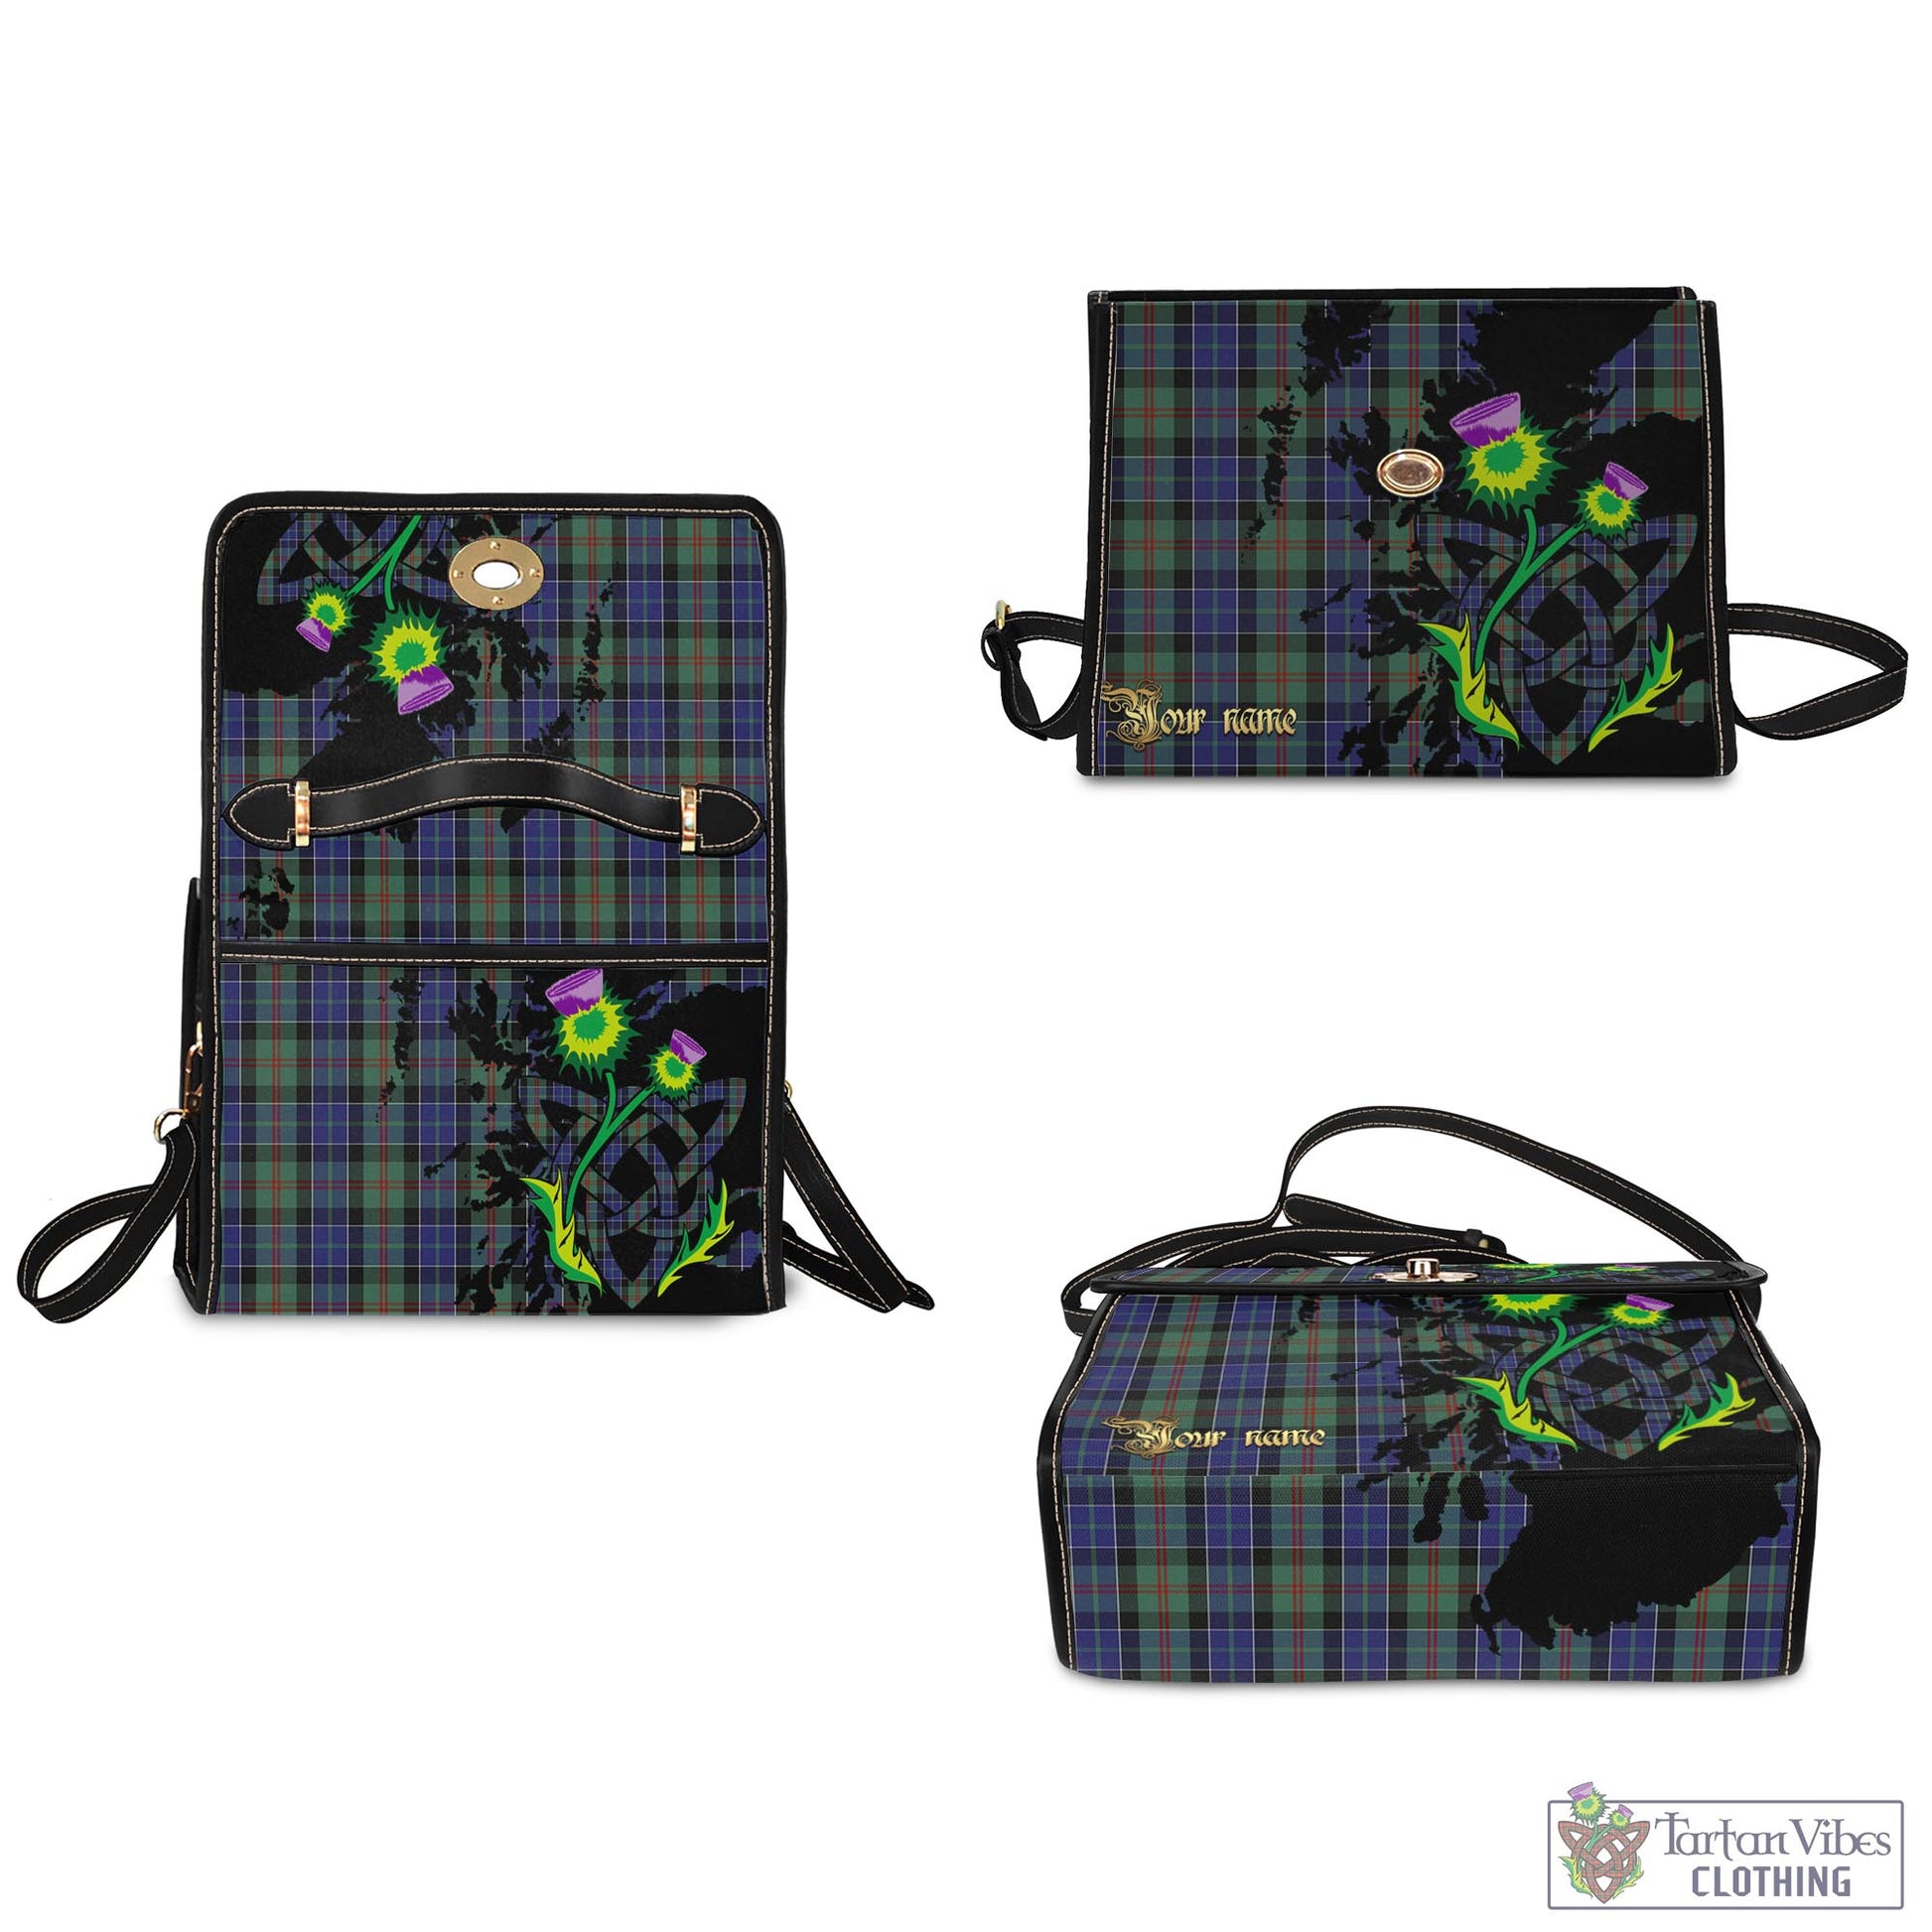 Tartan Vibes Clothing McFadzen #02 Tartan Waterproof Canvas Bag with Scotland Map and Thistle Celtic Accents